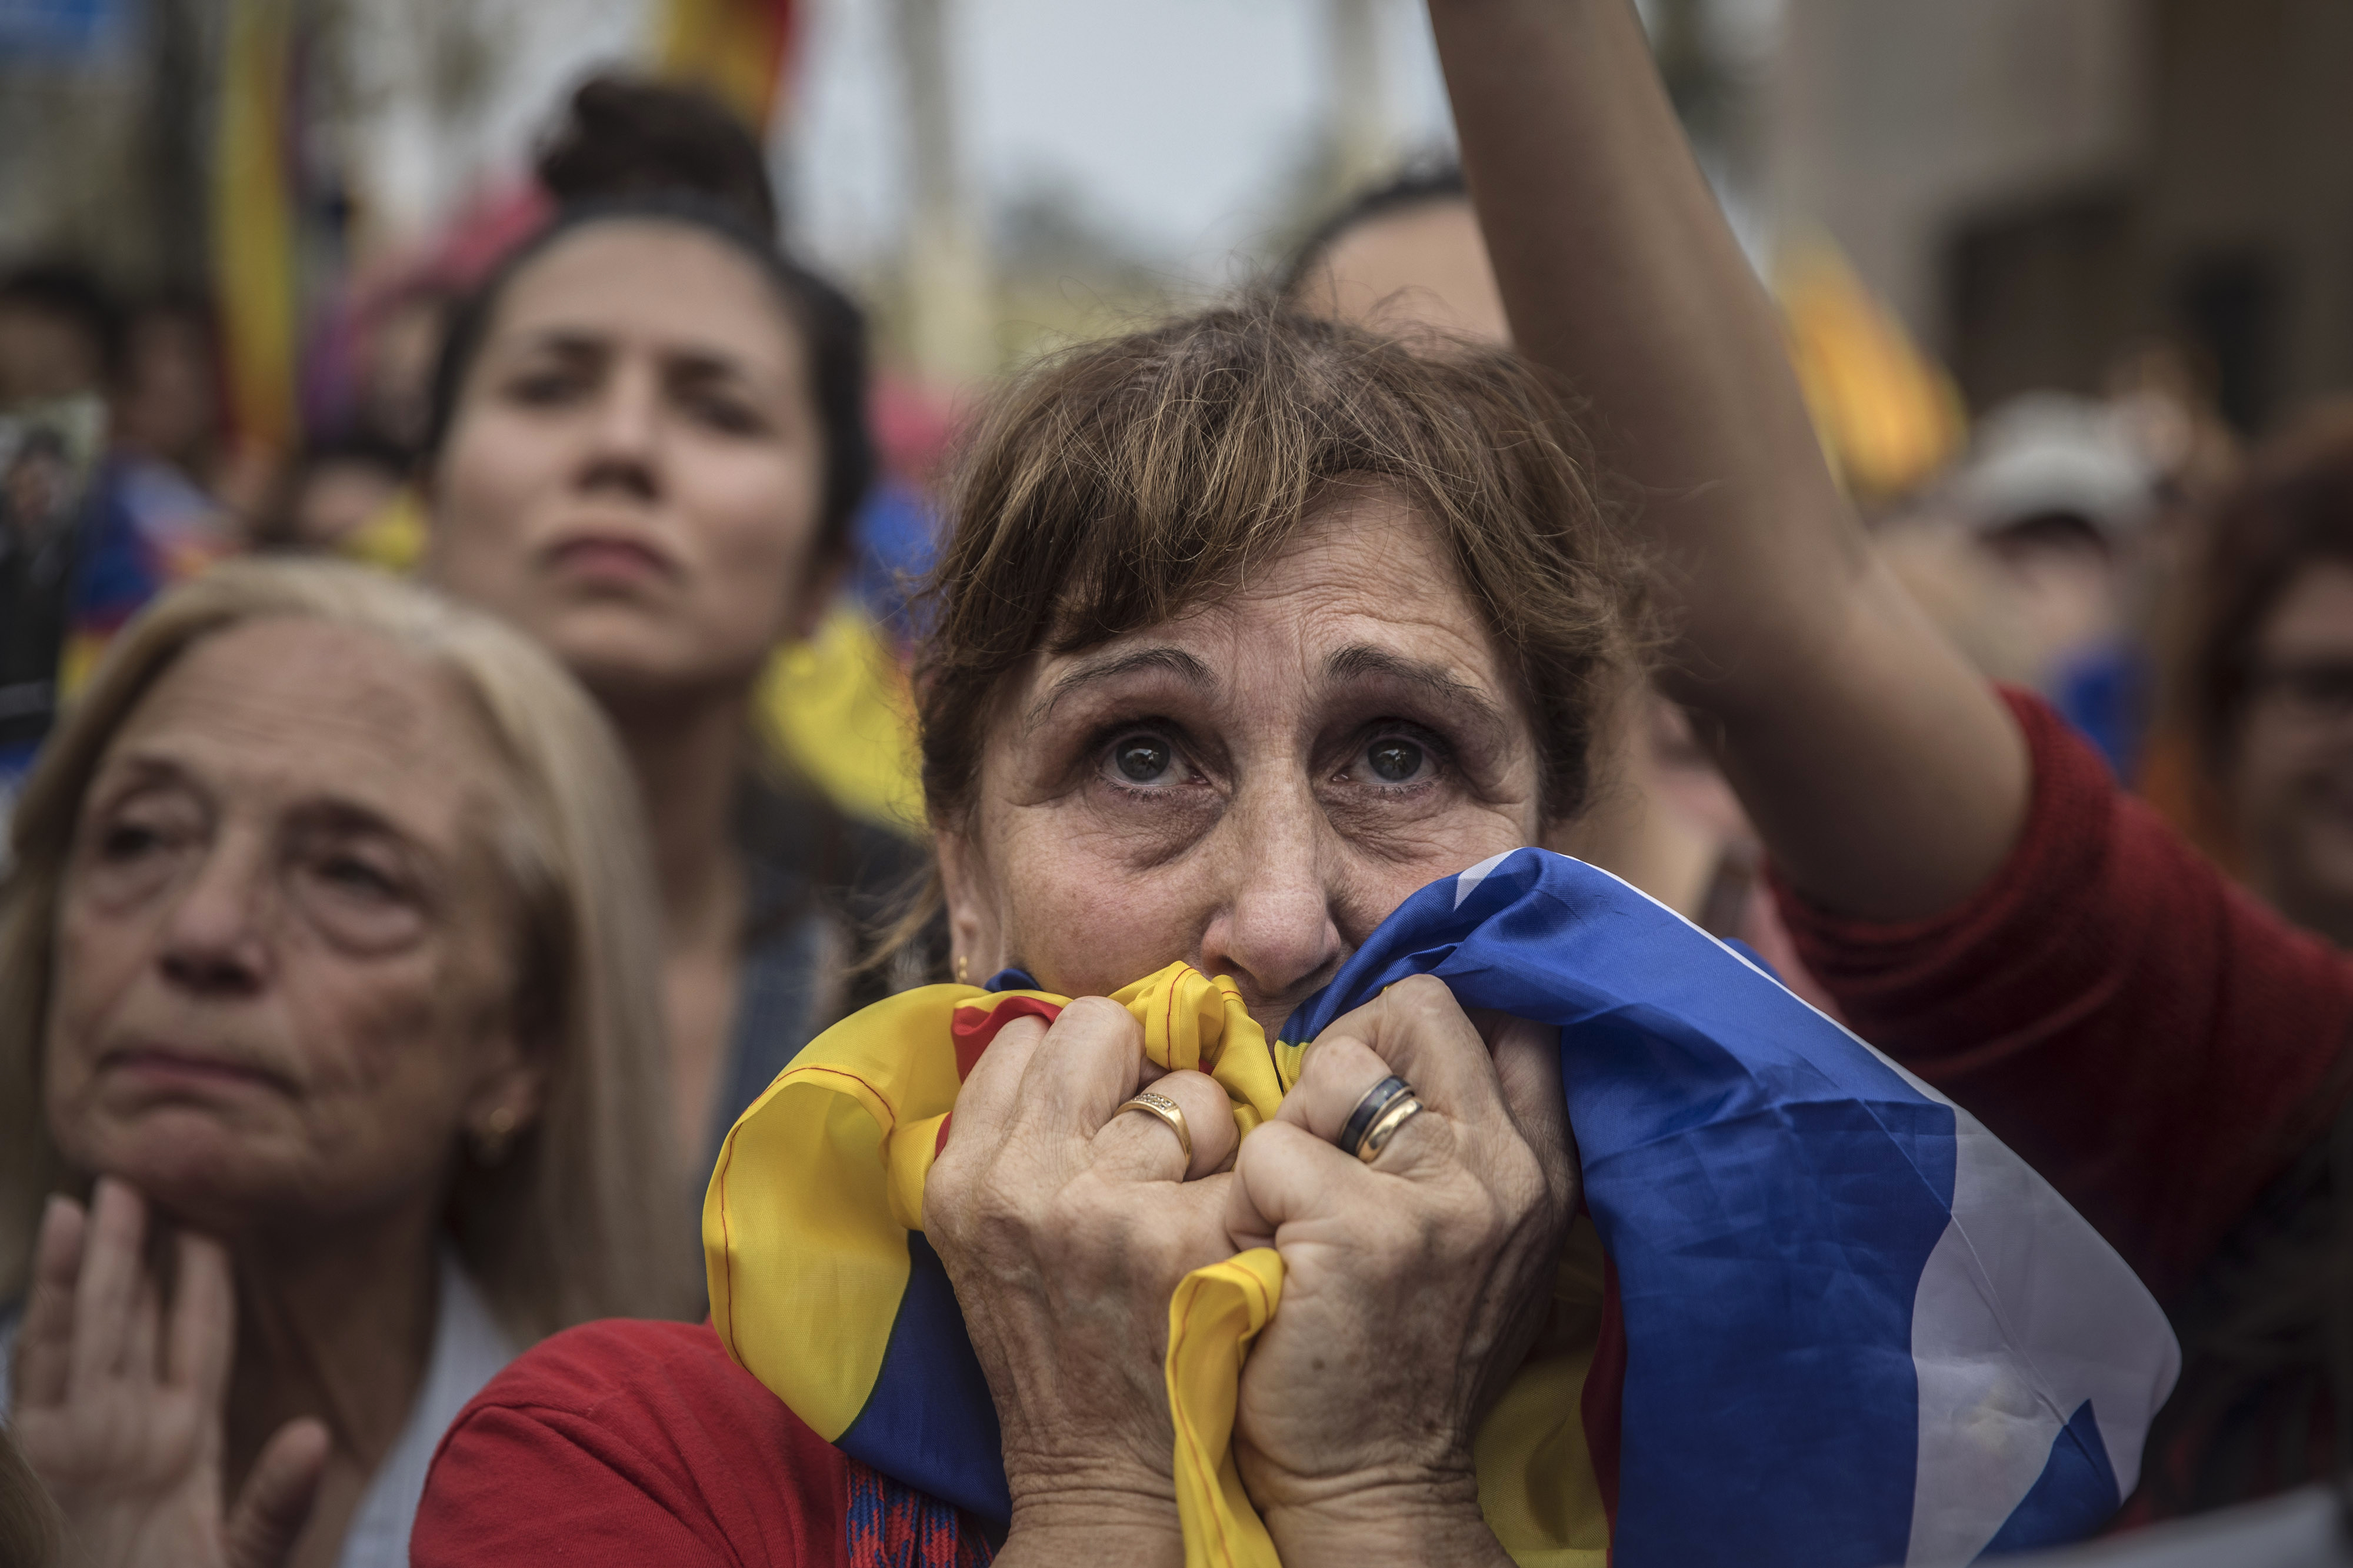 During a 2017 rally in Barcelona, a woman reacts as she watches the Catalan Parliament session during which lawmakers voted to secede from Spain. In an effort to foster civil discourse, Politibot distributed well-reasoned opposing viewpoints on the divisive issue